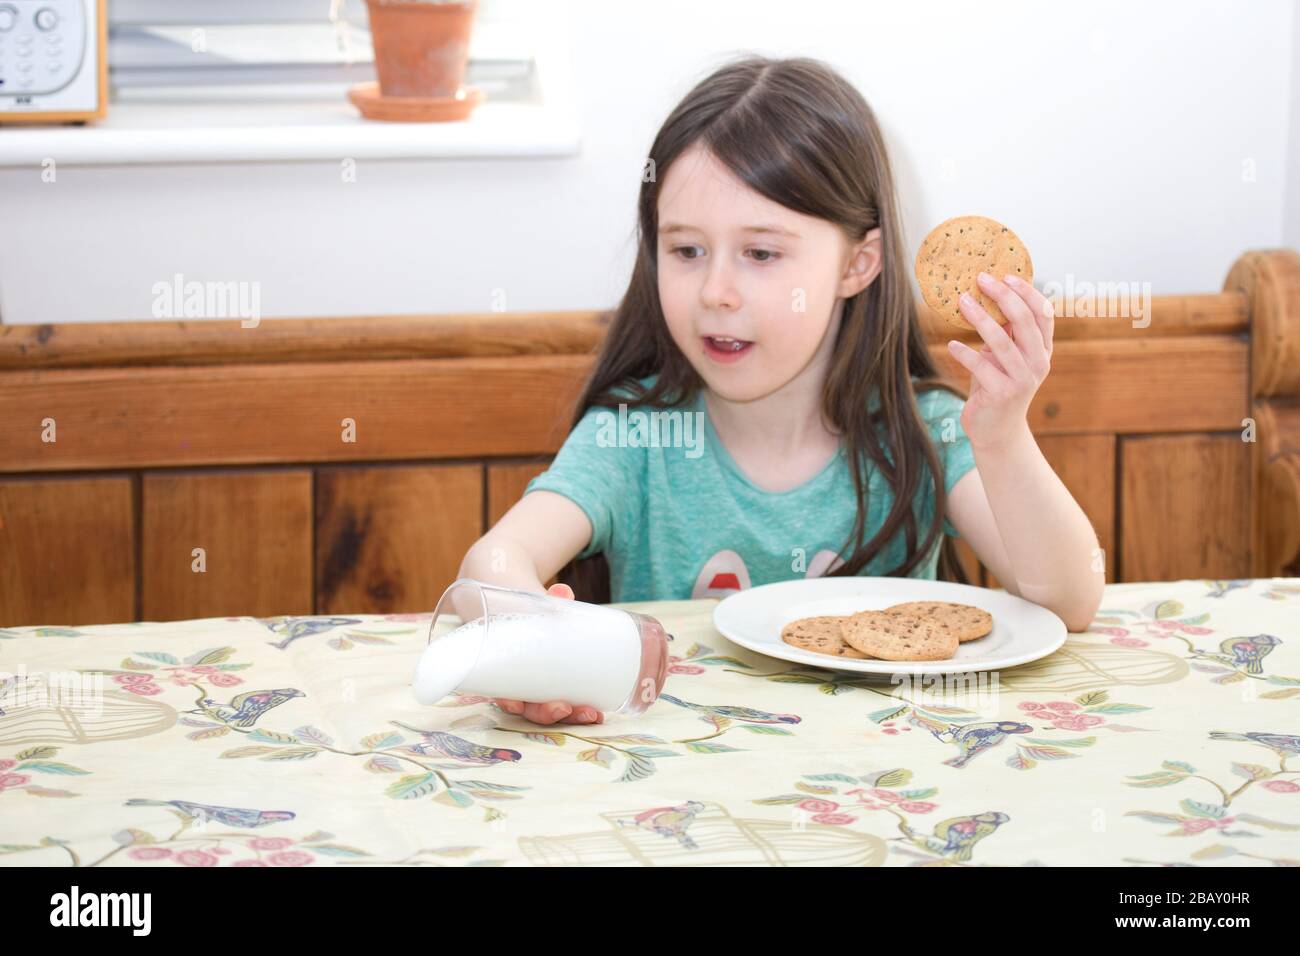 Young girl spilling milk sat at the kitchen table Stock Photo